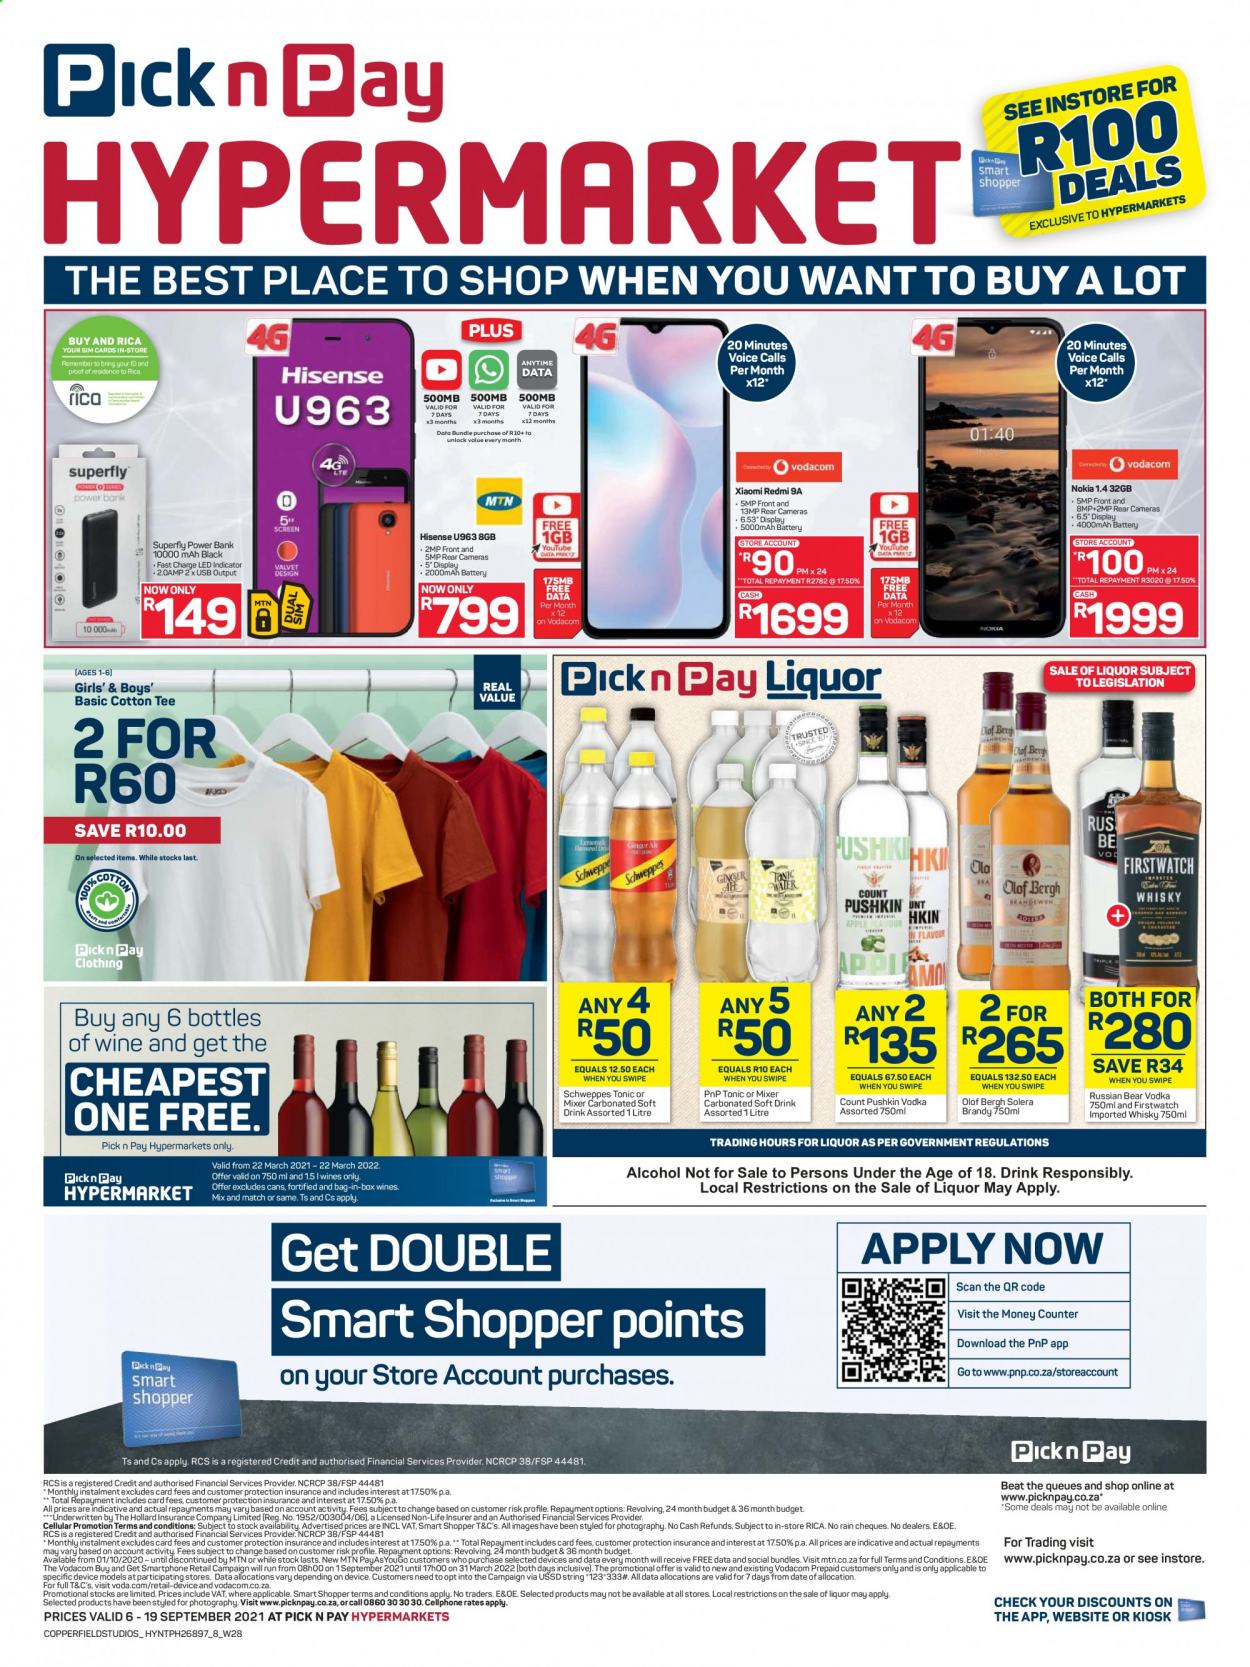 Pick n Pay specials - 09.06.2021 - 09.19.2021. 